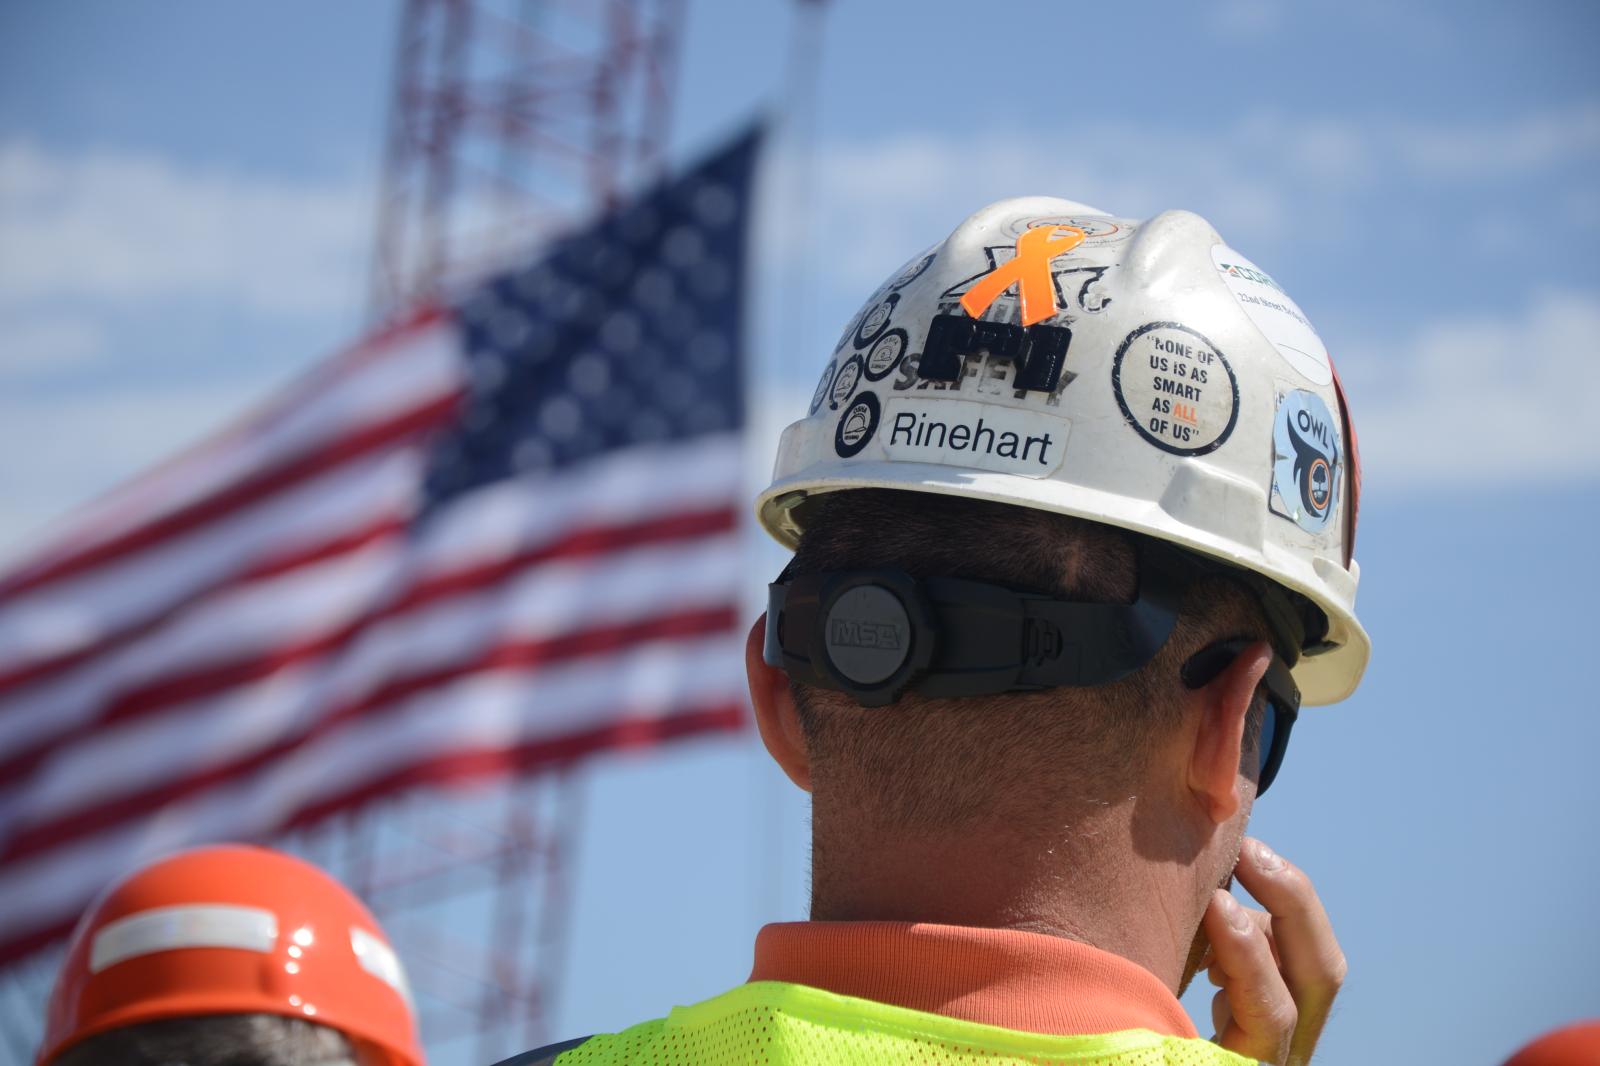 Image from Moments - Construction worker, Geoff Rinehart, listens to a...